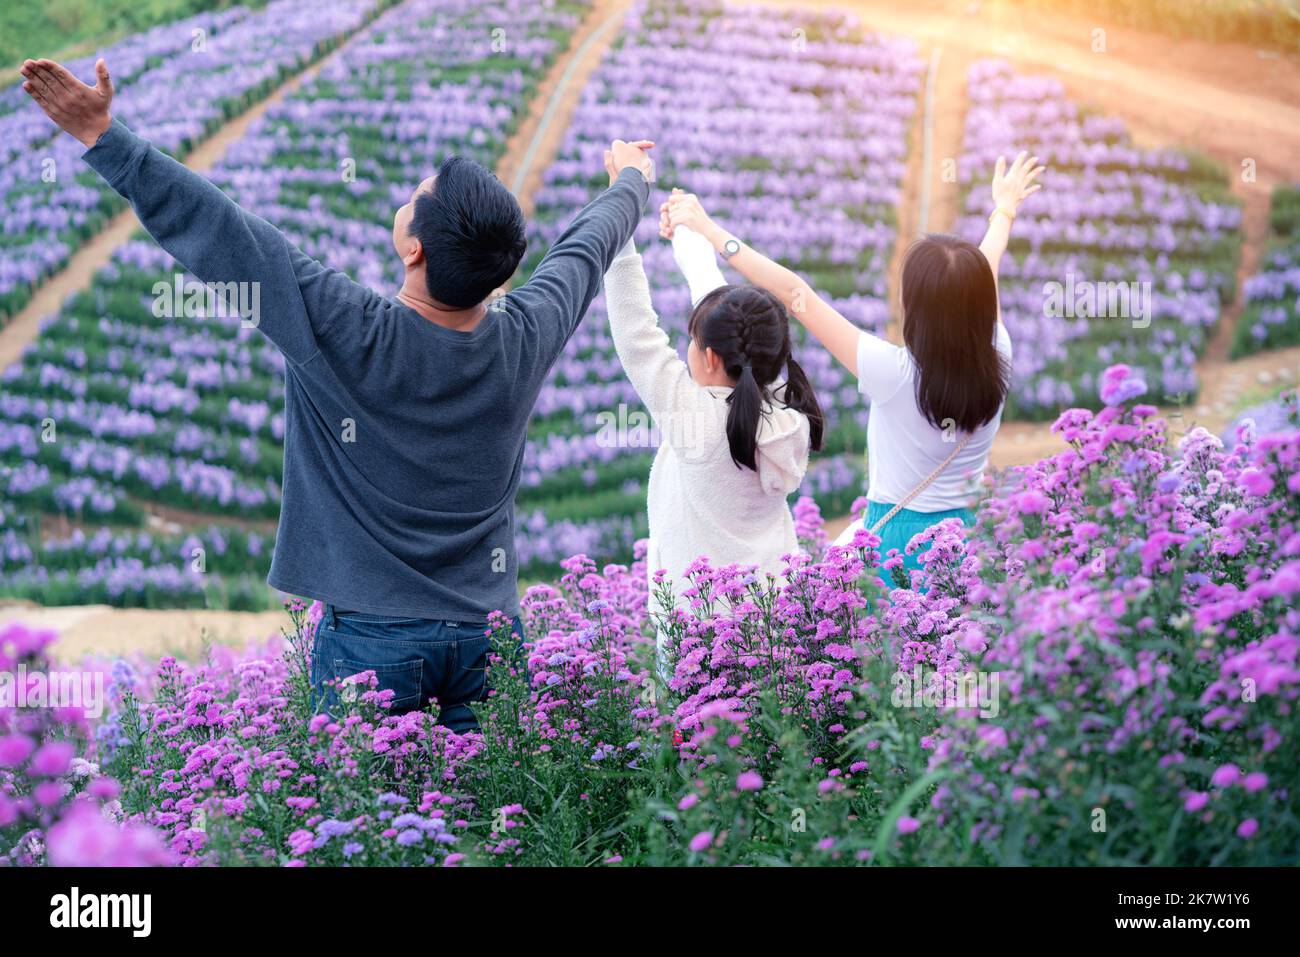 A happy family consisting of father, mother and daughter stand with their arms extended to convey freedom in a field of flowers in margaret. Stock Photo